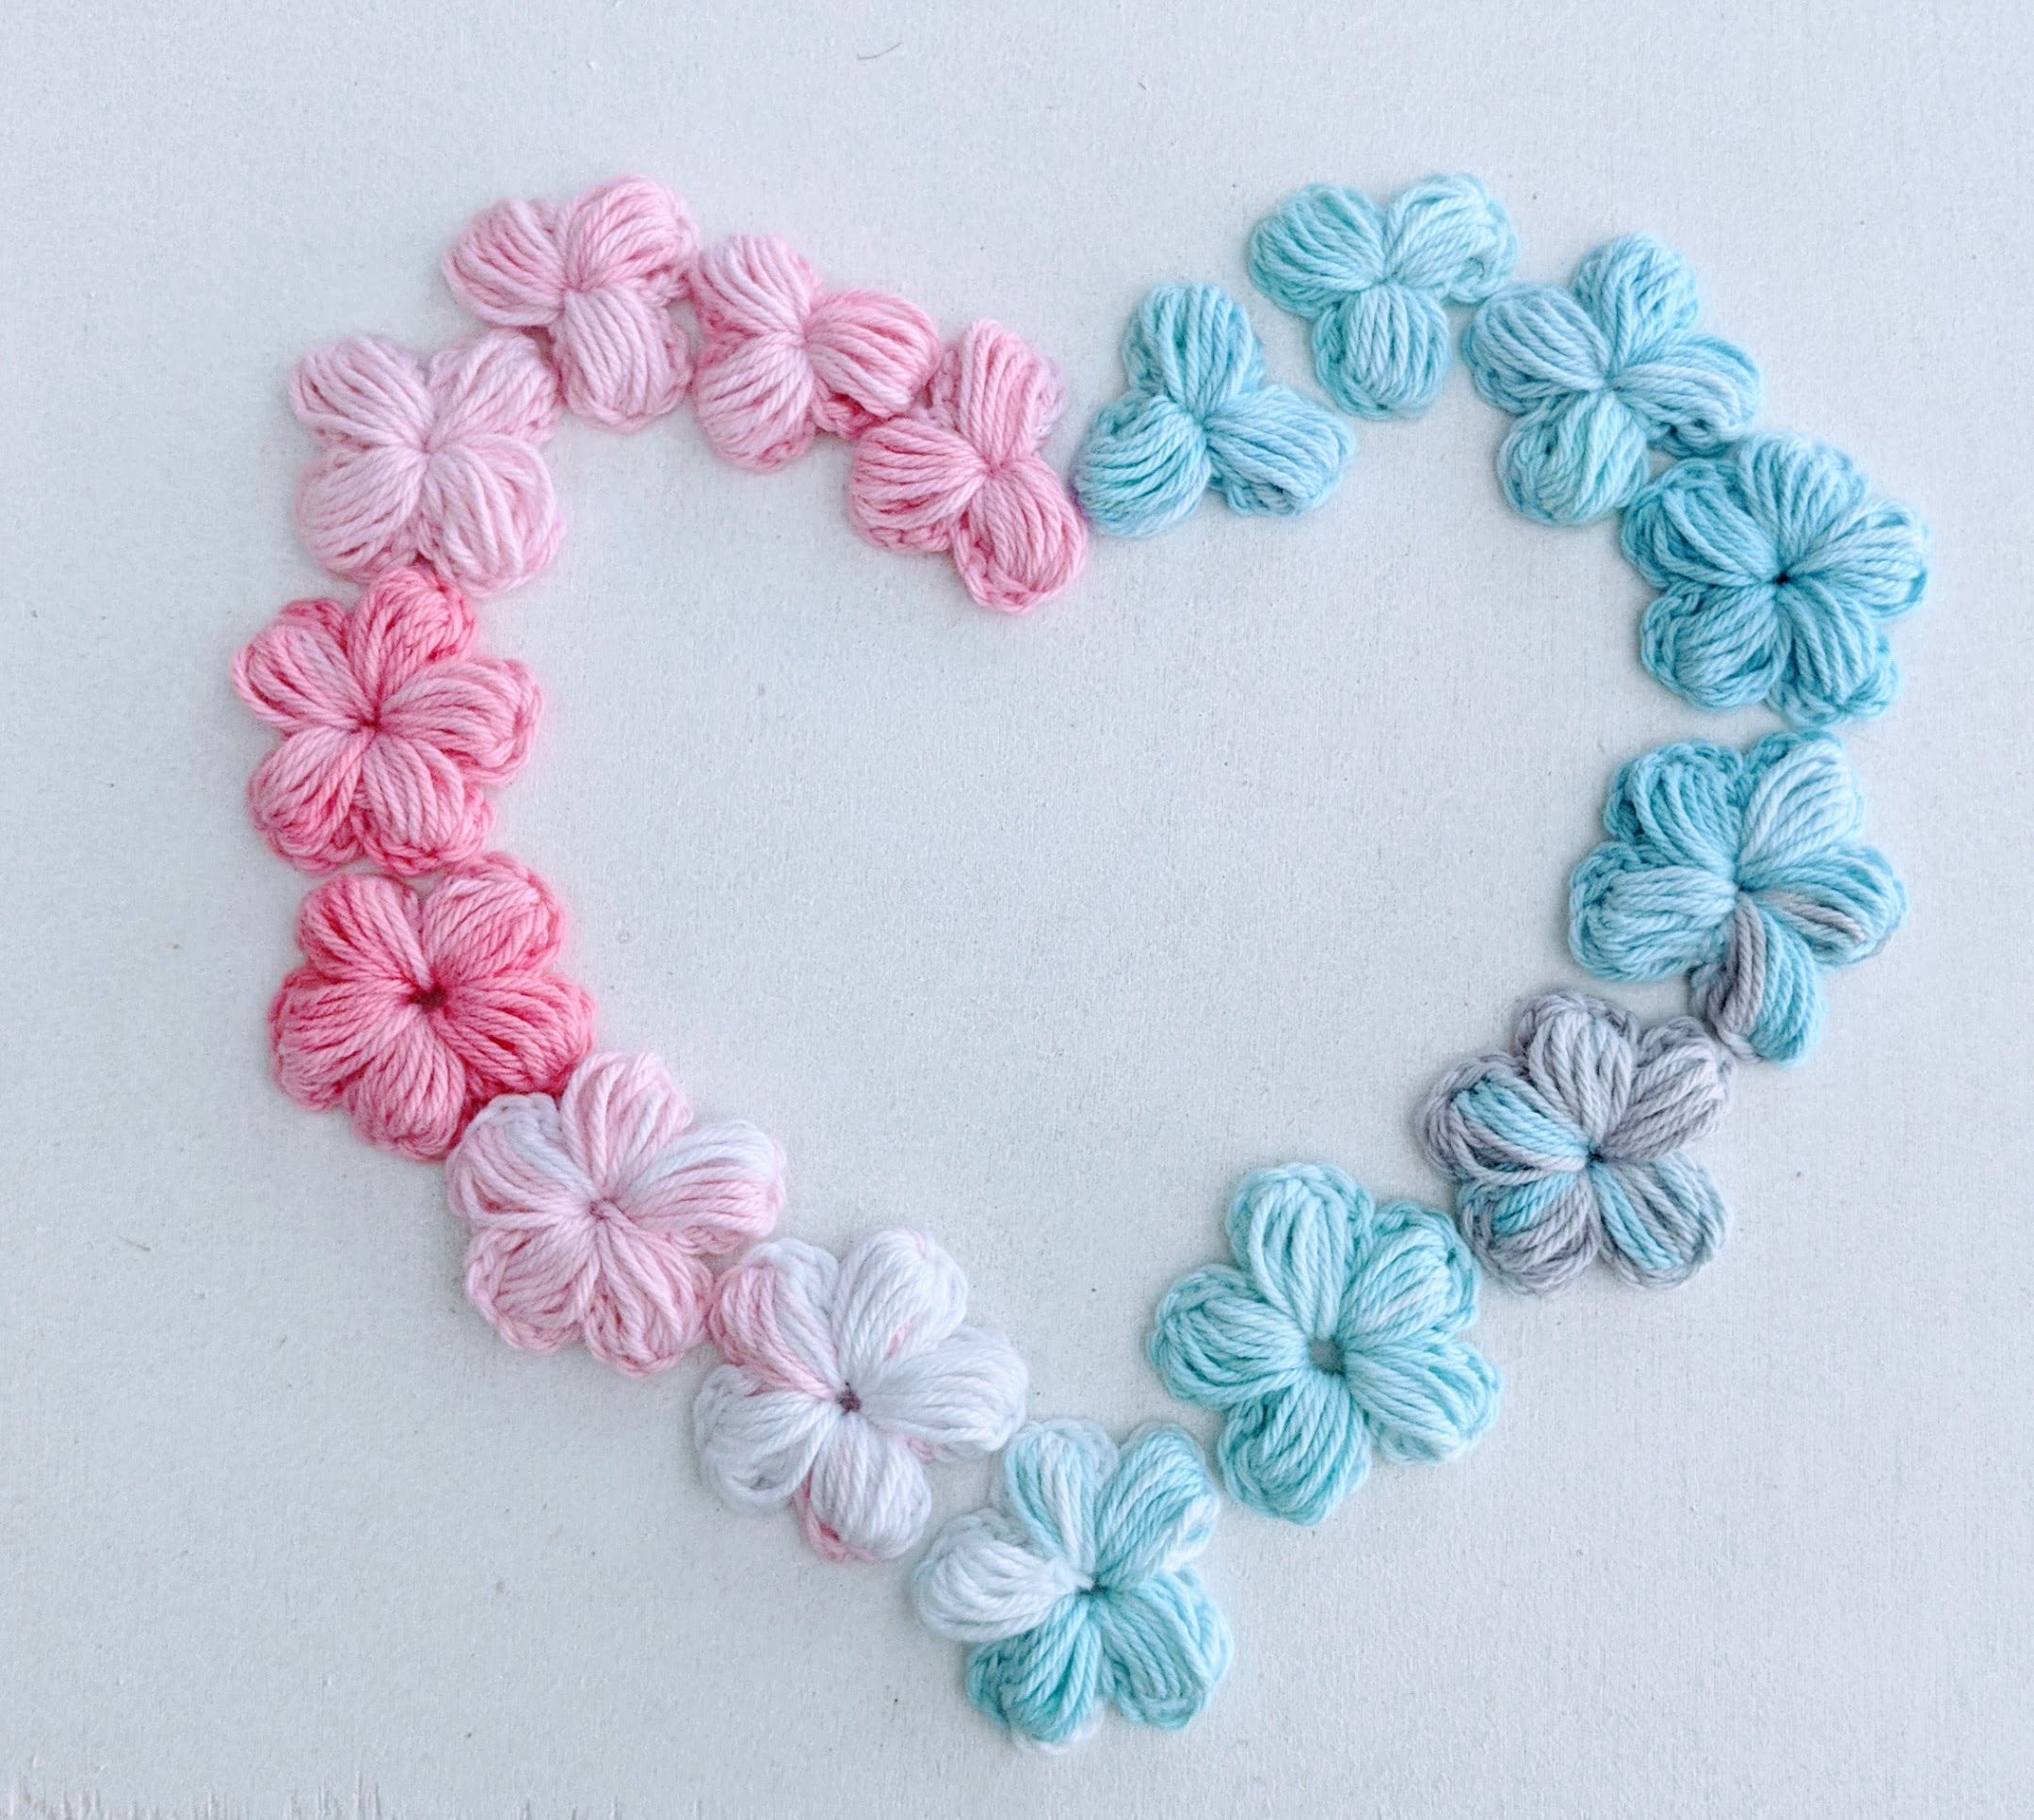 How to Make Crochet Flowers - My Crochet Space